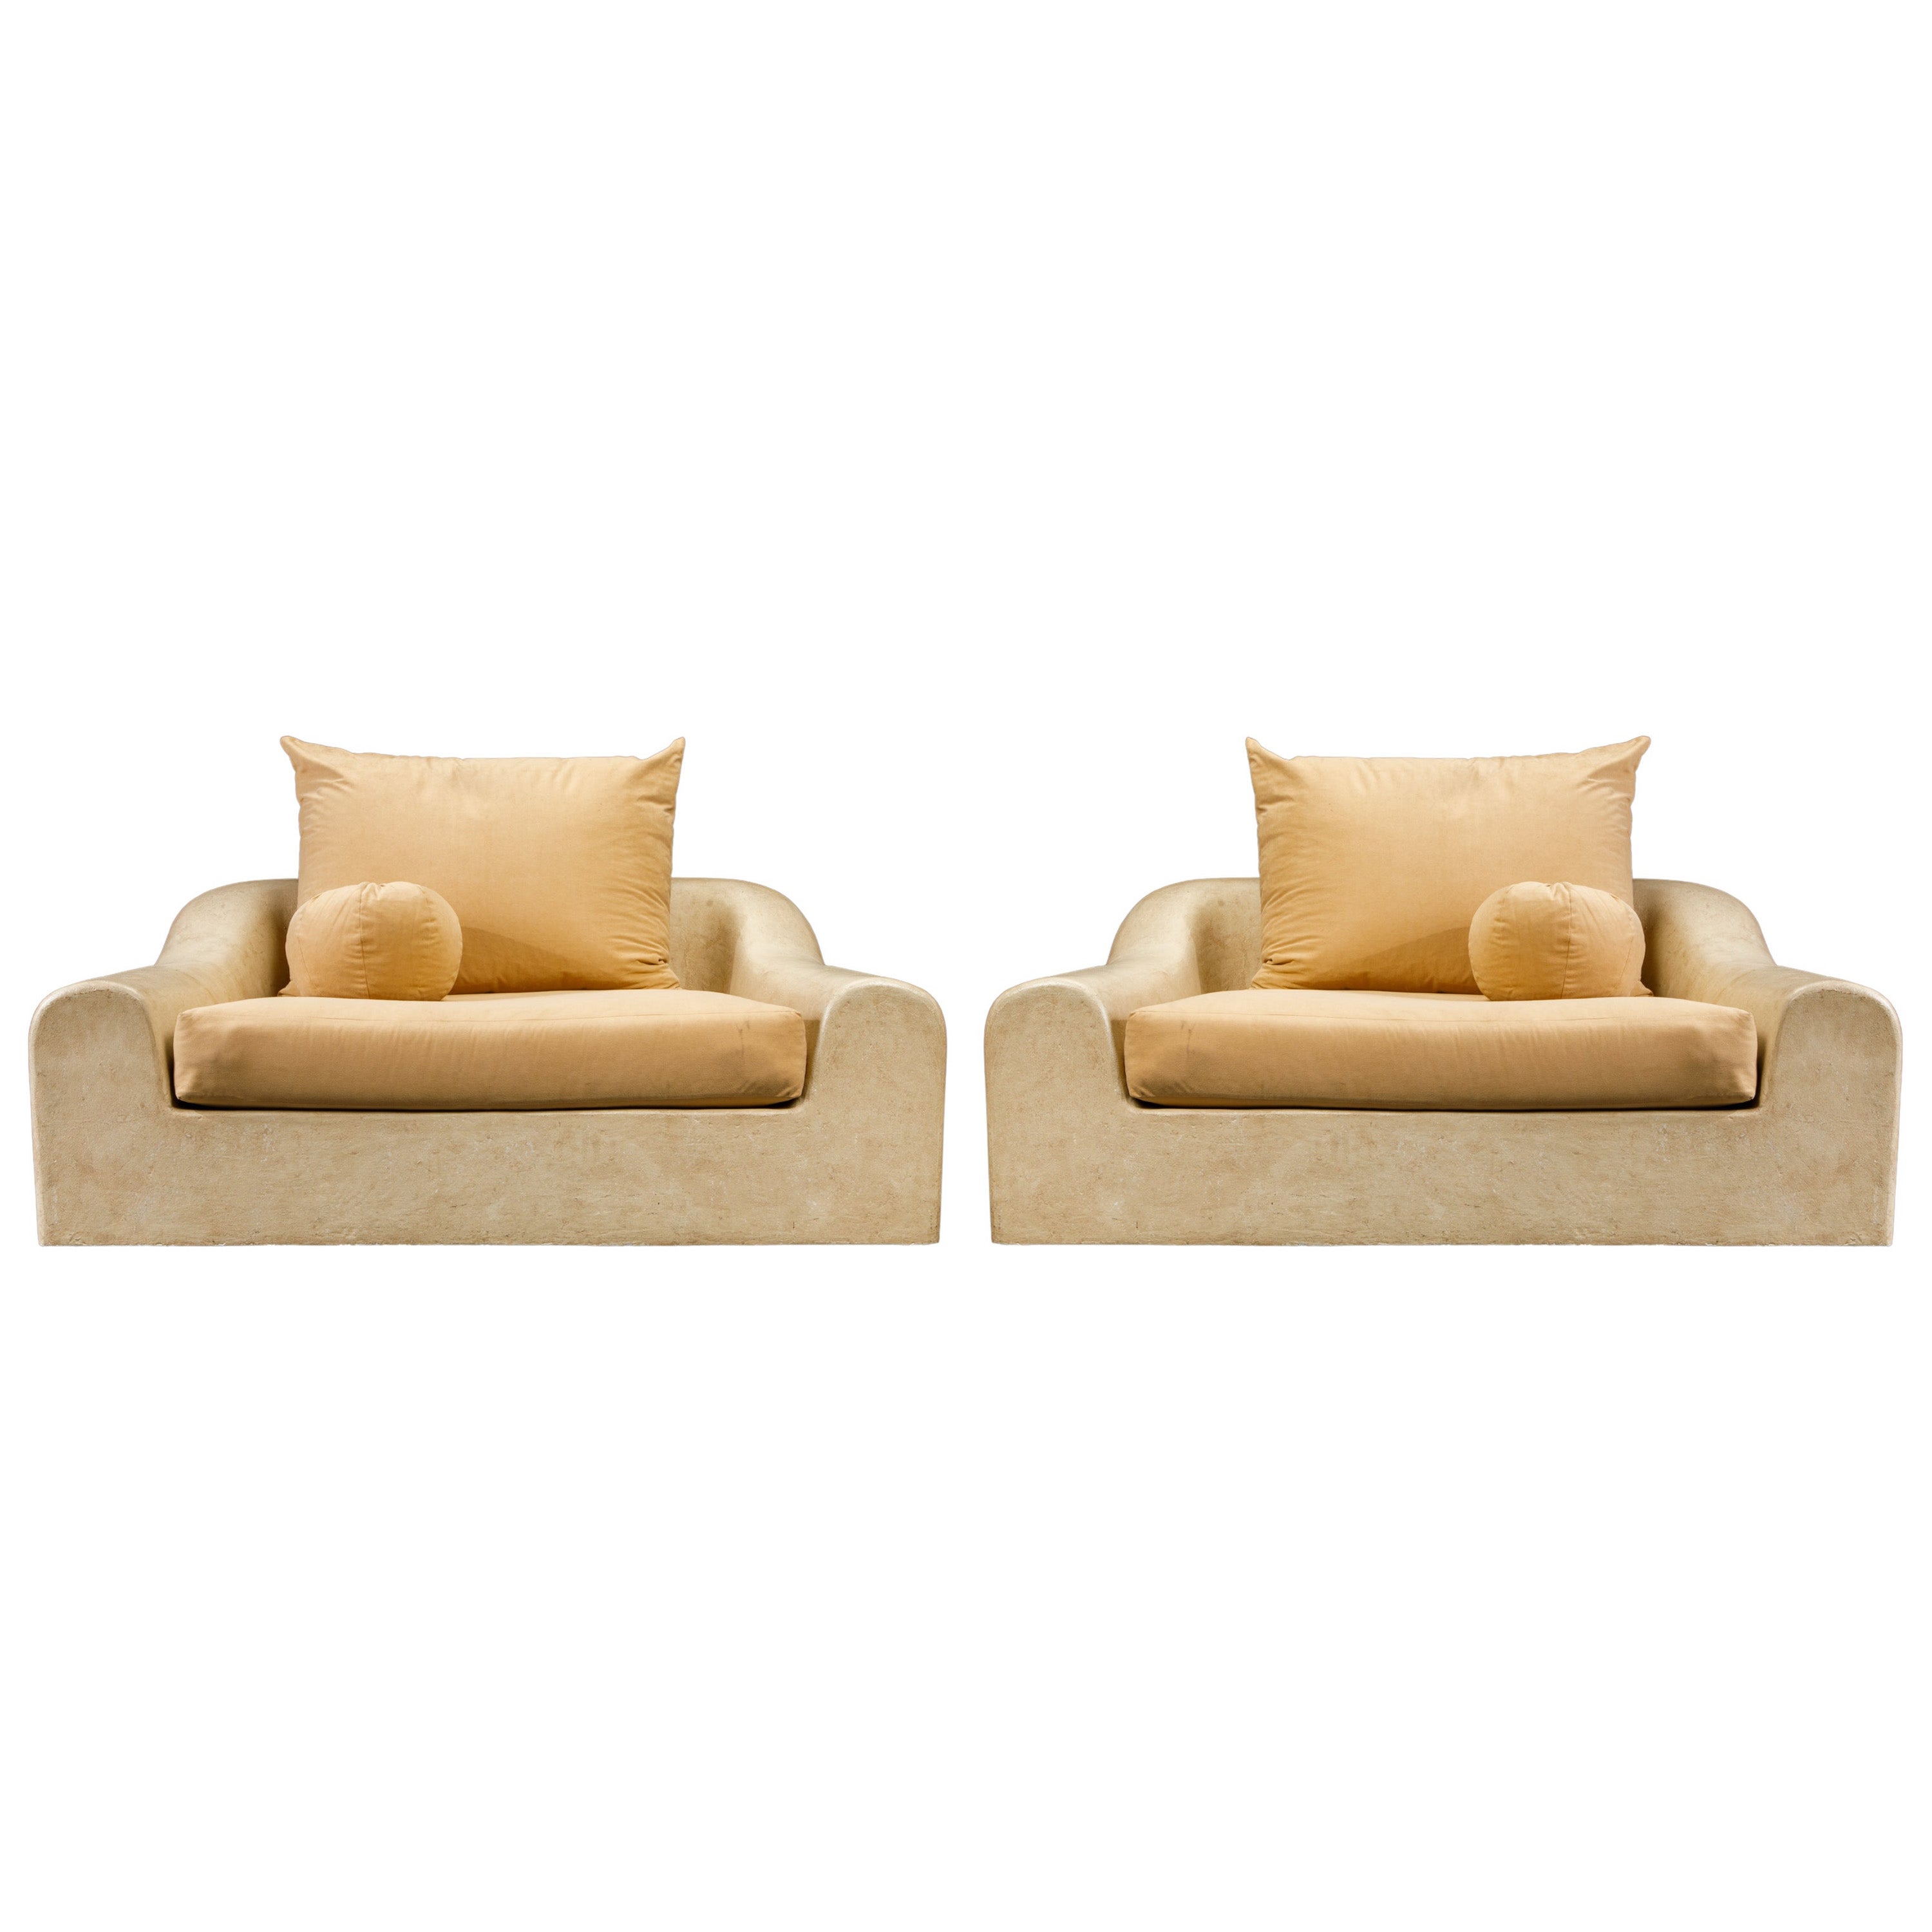 Monumental Pair of Fiberglass 'Jennifer' Lounge Chairs by Michael Taylor, 1970s For Sale